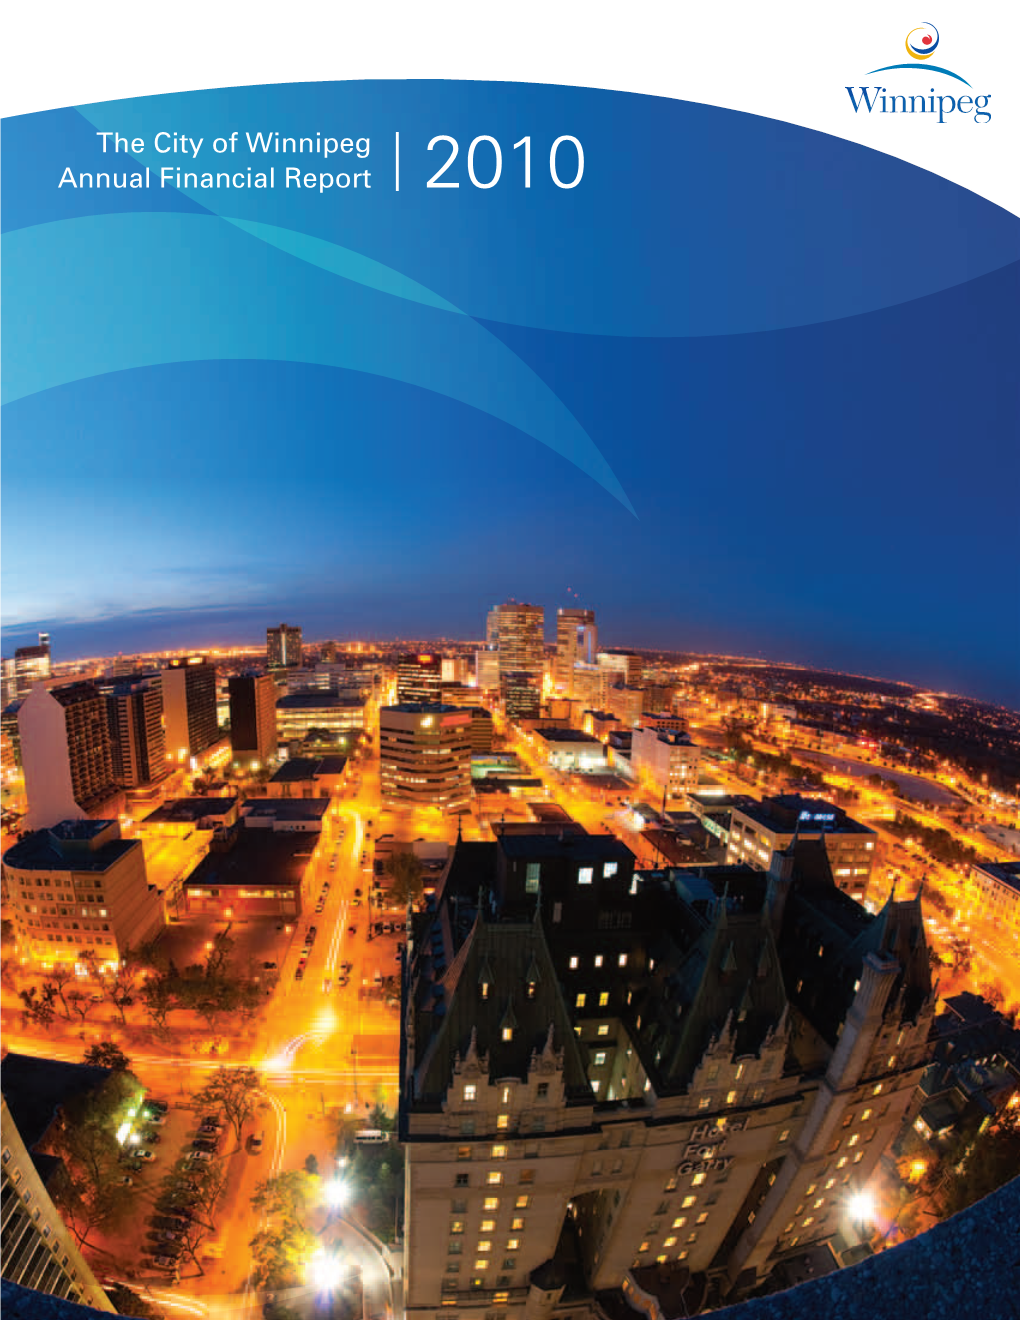 The City of Winnipeg Annual Financial Report 2010 Vision to Be a Vibrant and Healthy City Which Places Its Highest Priority on Quality of Life for All Its Citizens